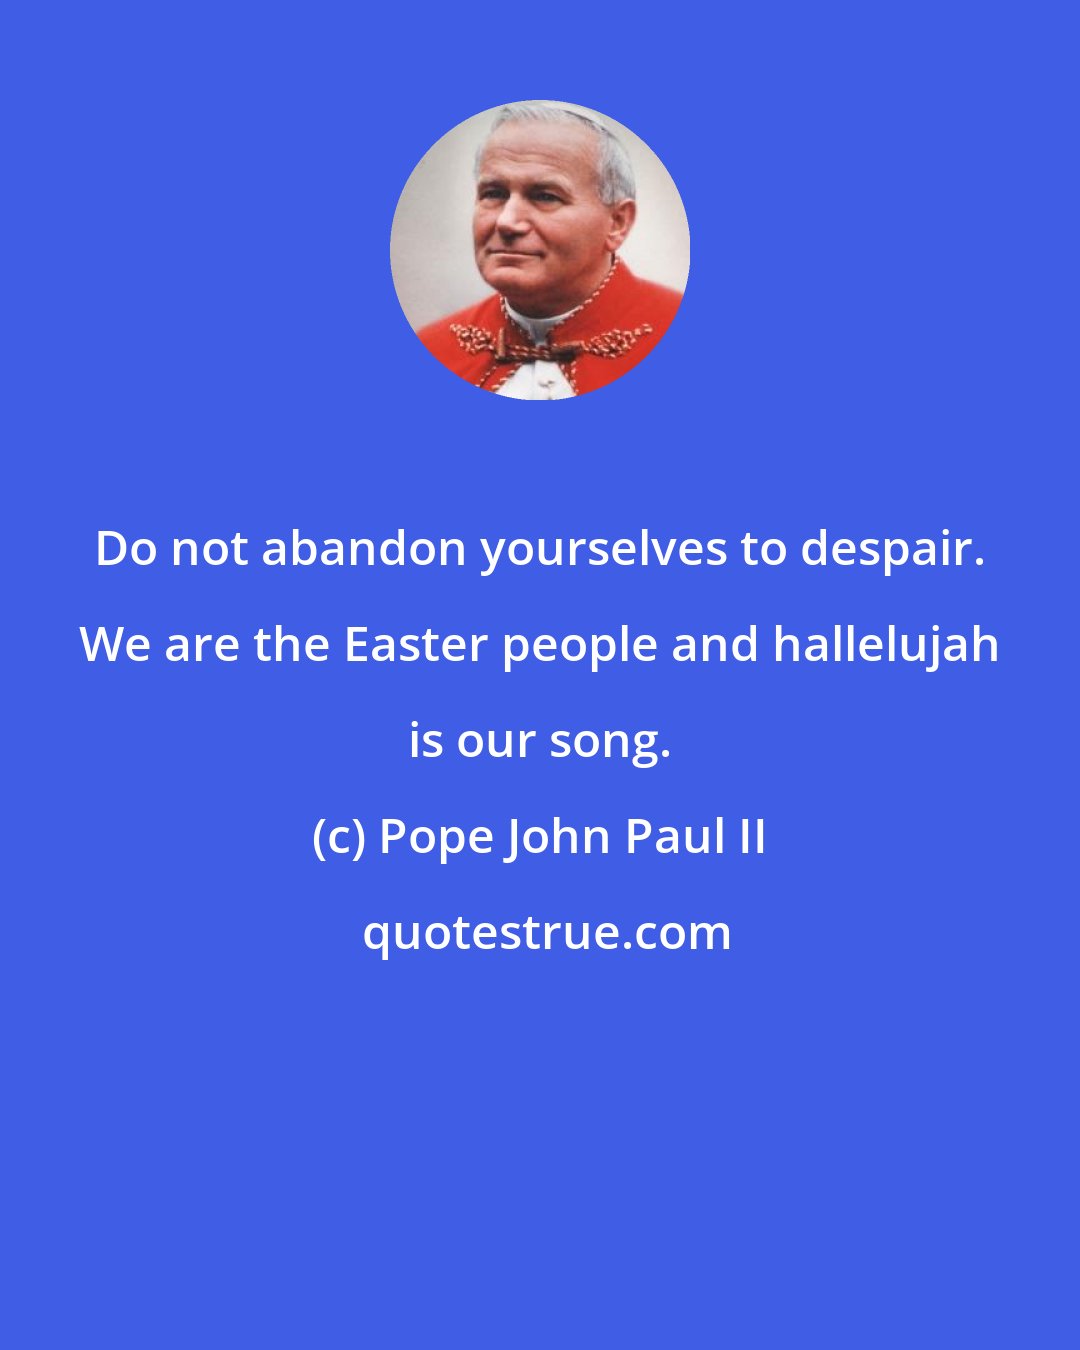 Pope John Paul II: Do not abandon yourselves to despair. We are the Easter people and hallelujah is our song.